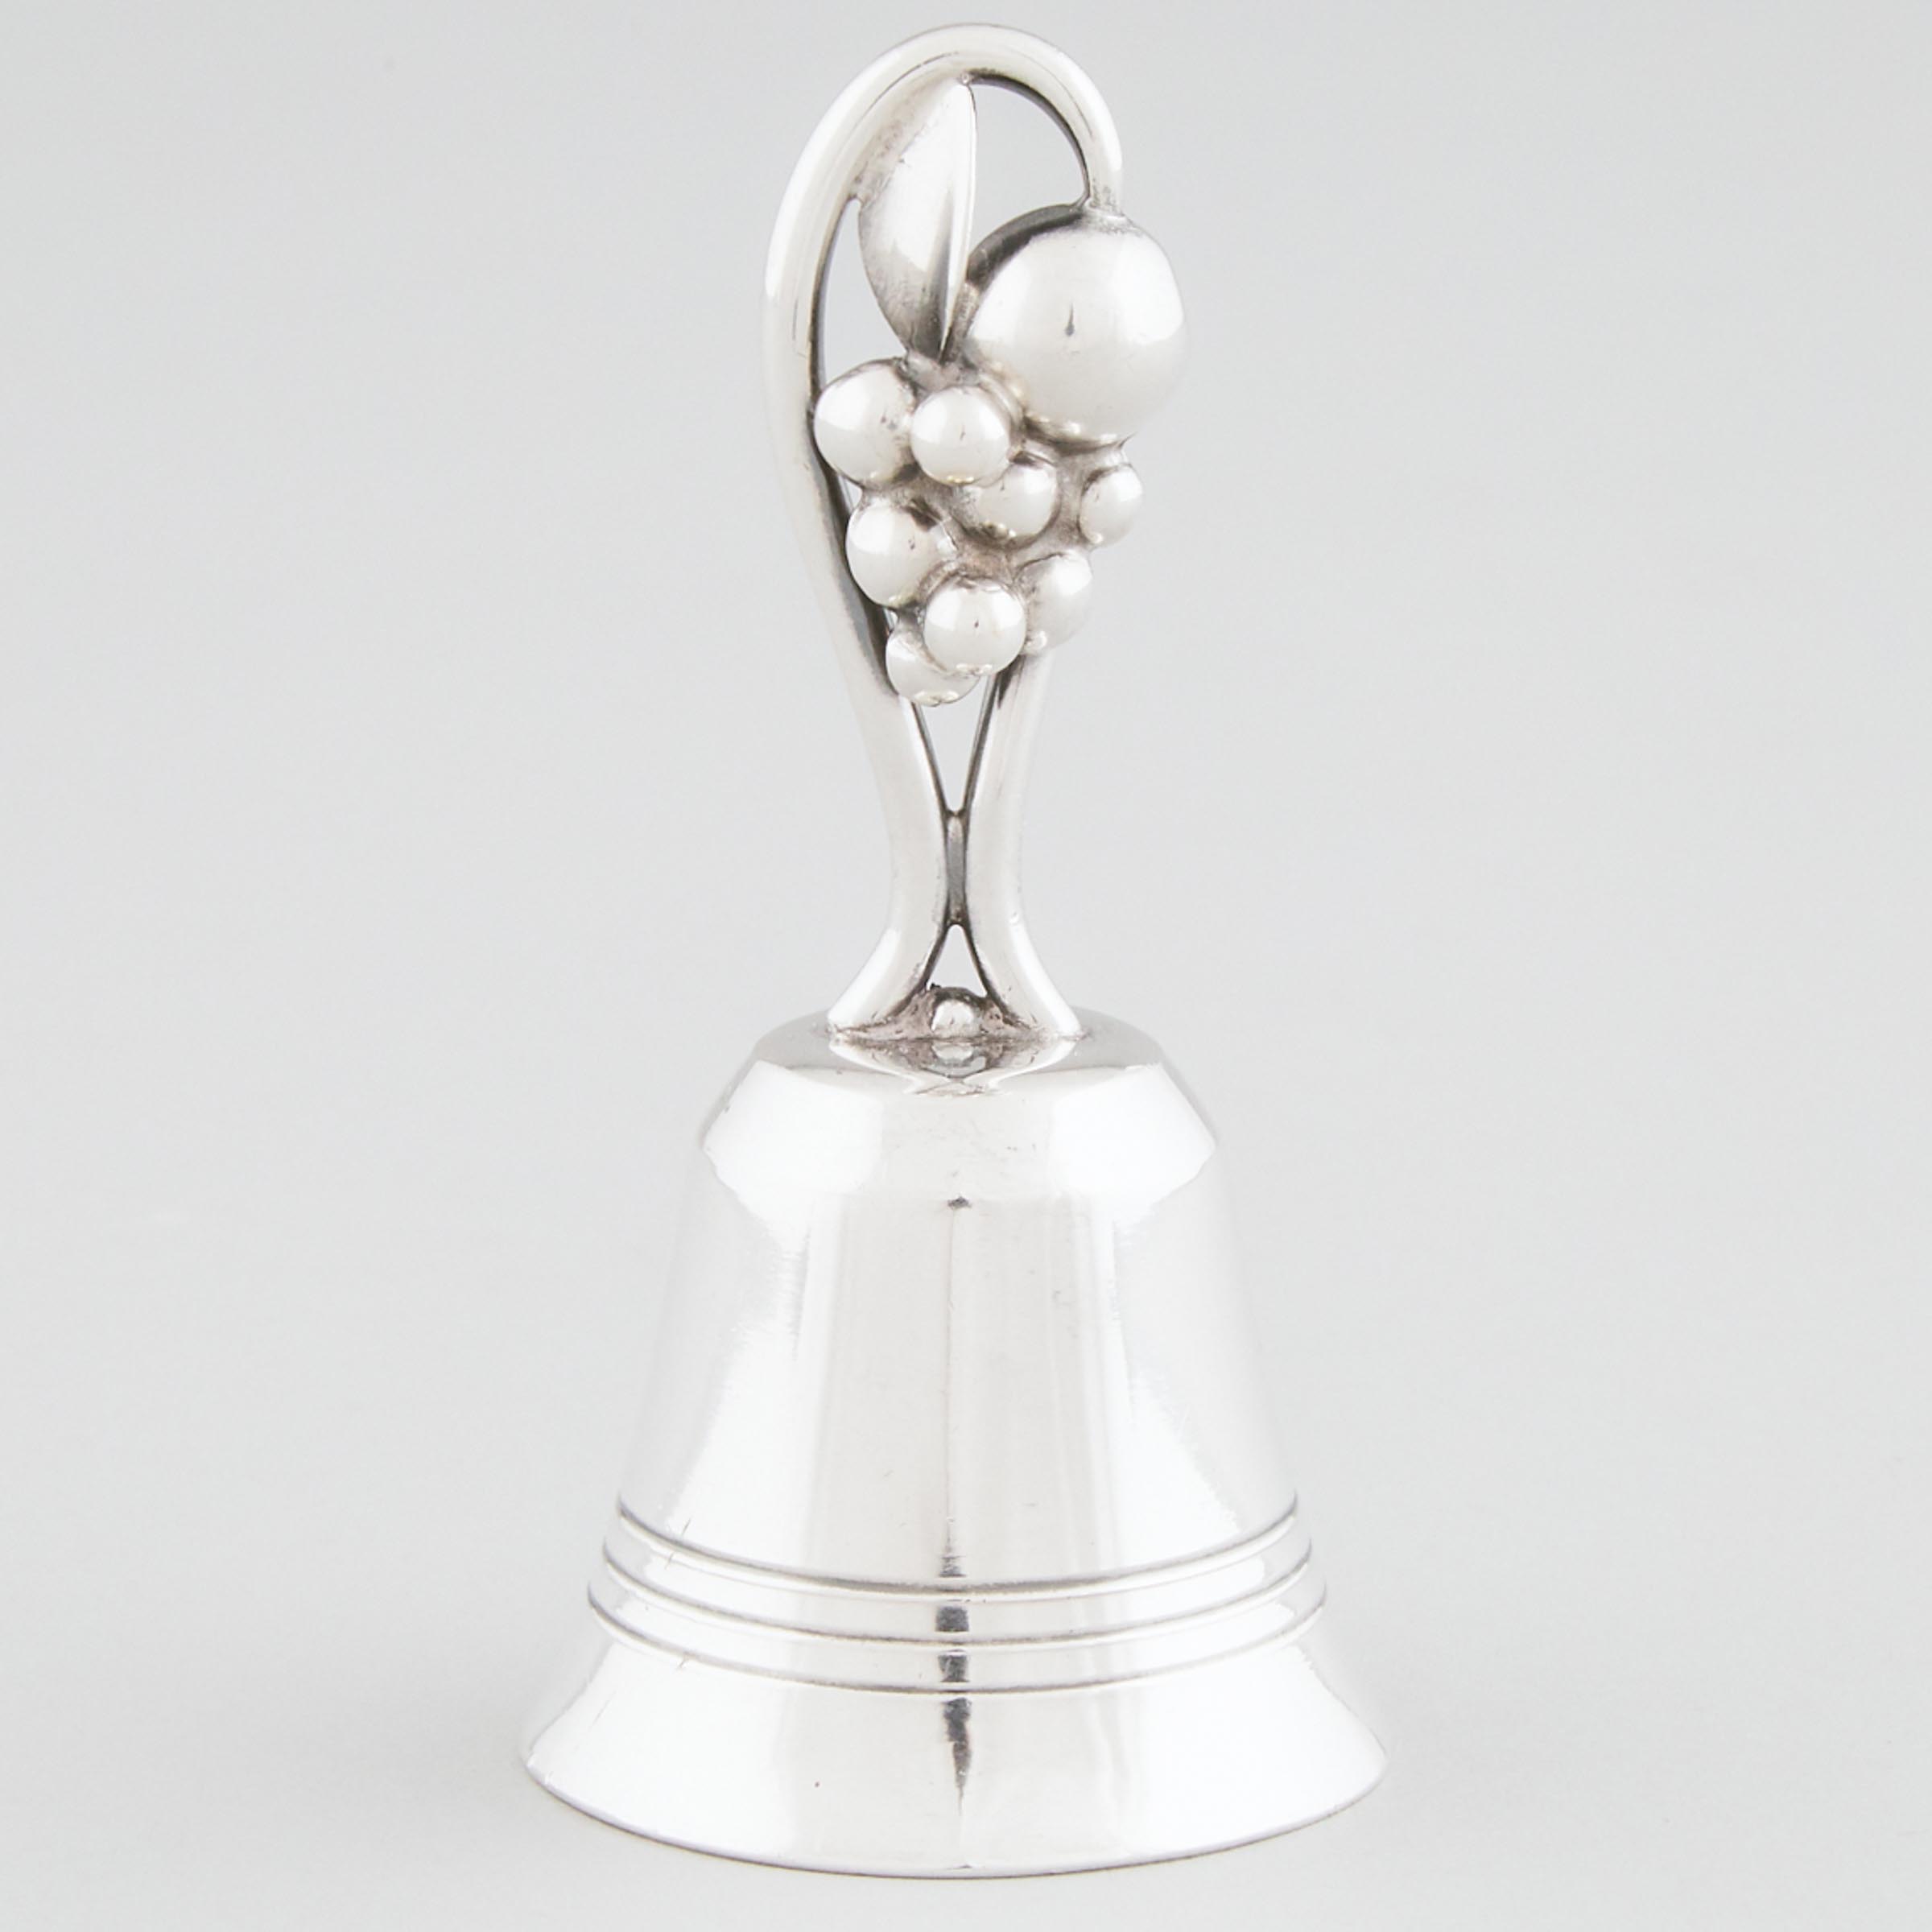 Canadian Silver Small Table Bell, Carl Poul Petersen, Montreal, Que., mid-20th century